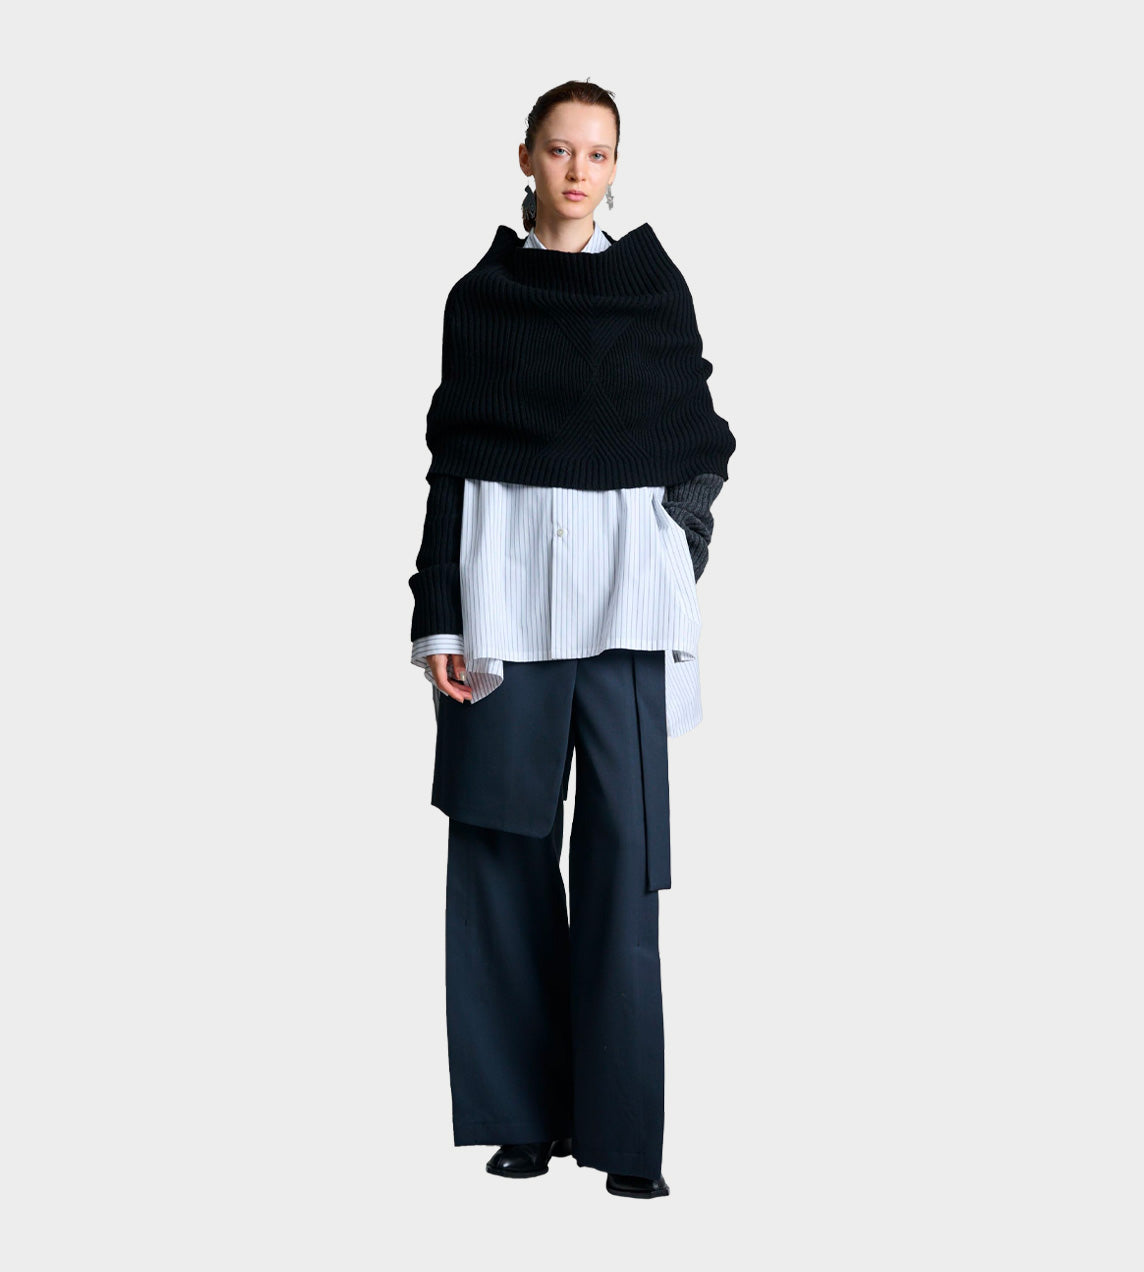 UJOH - Knit Shrug with Sleeves Black